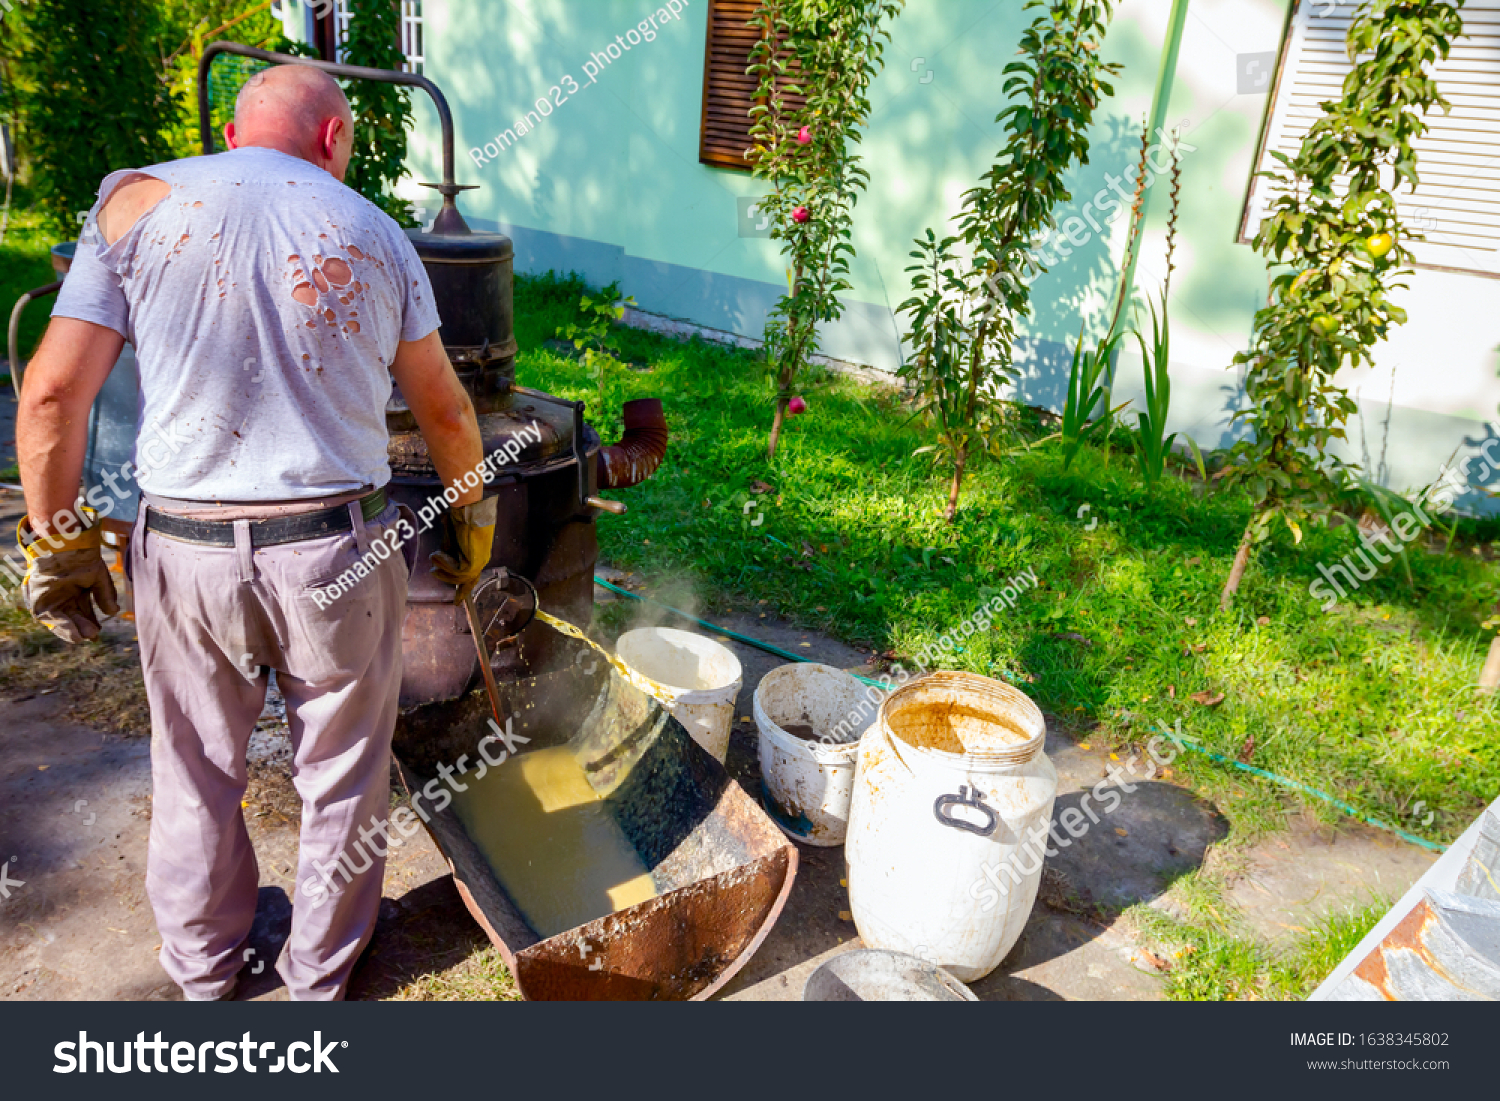 Man is unloading boiler of homemade distillery made of copper to release used fruit marc, making moonshine schnapps, alcoholic beverages such as brandy, cognac, whiskey, bourbon, gin, and scotch. #1638345802